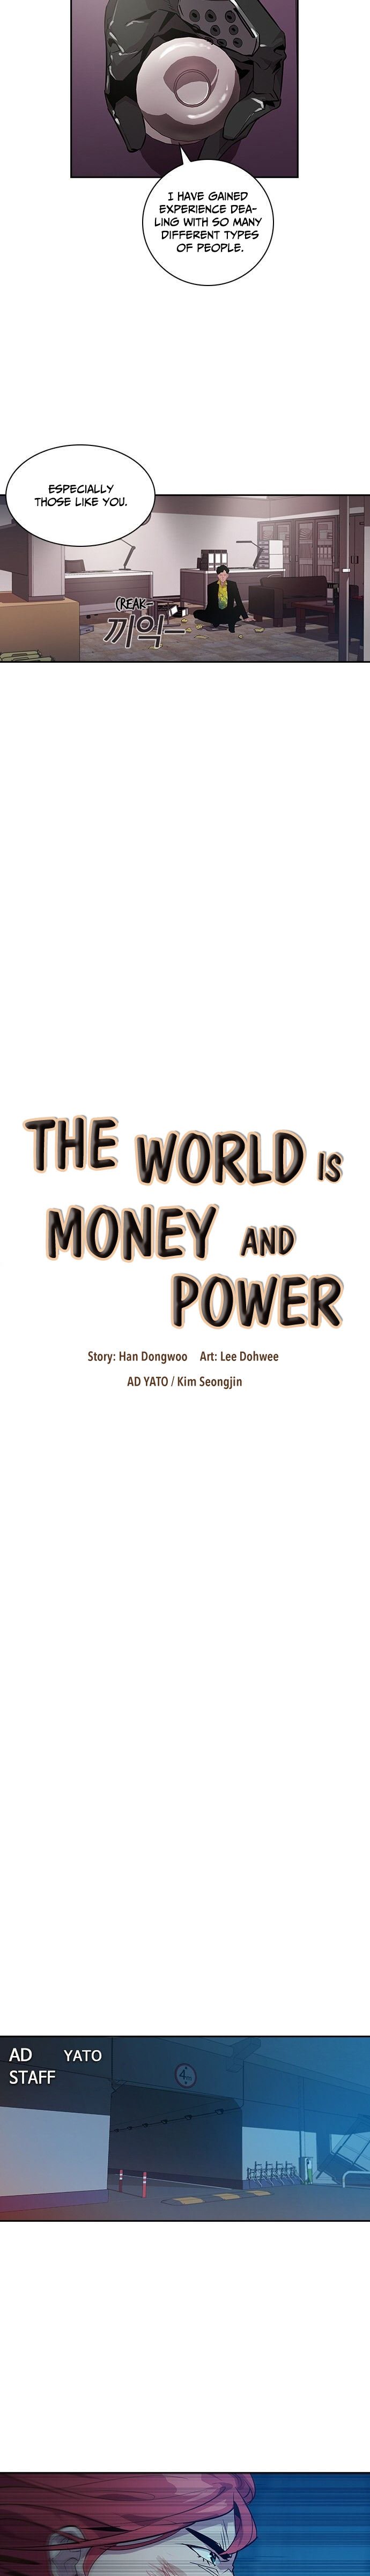 the-world-is-money-and-power-chap-19-8